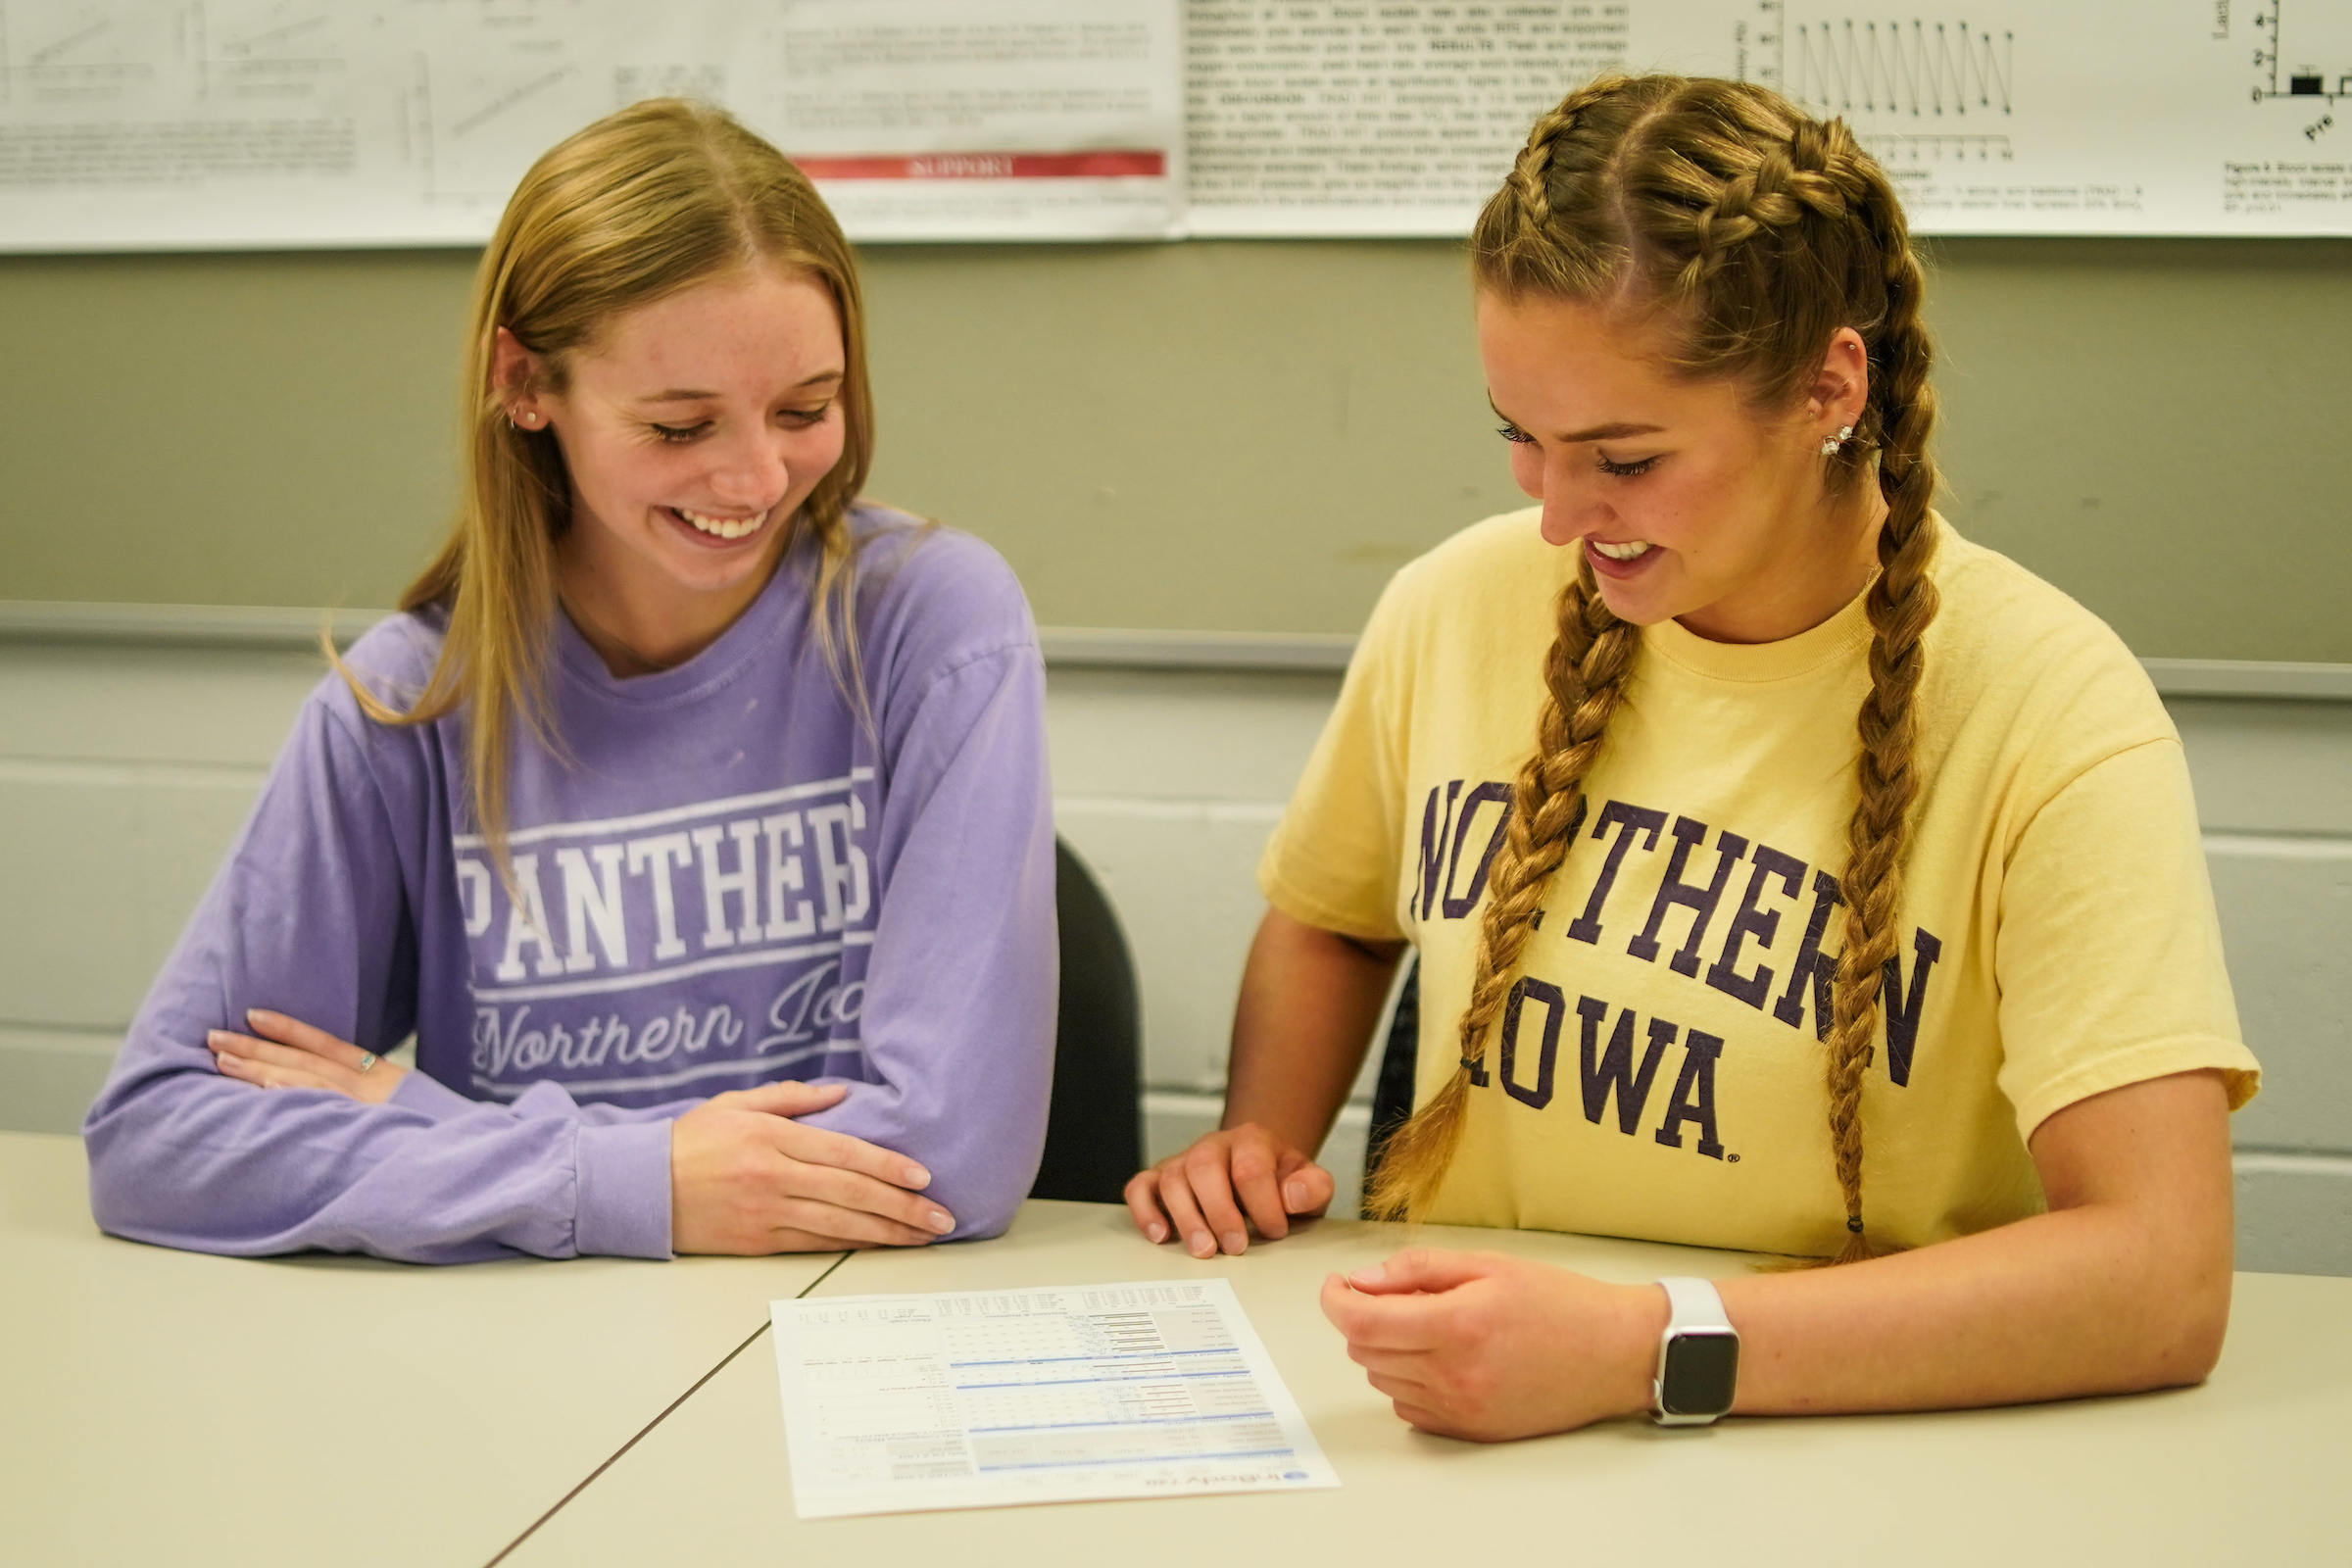 Two students sitting at desk, smiling and looking at a paper